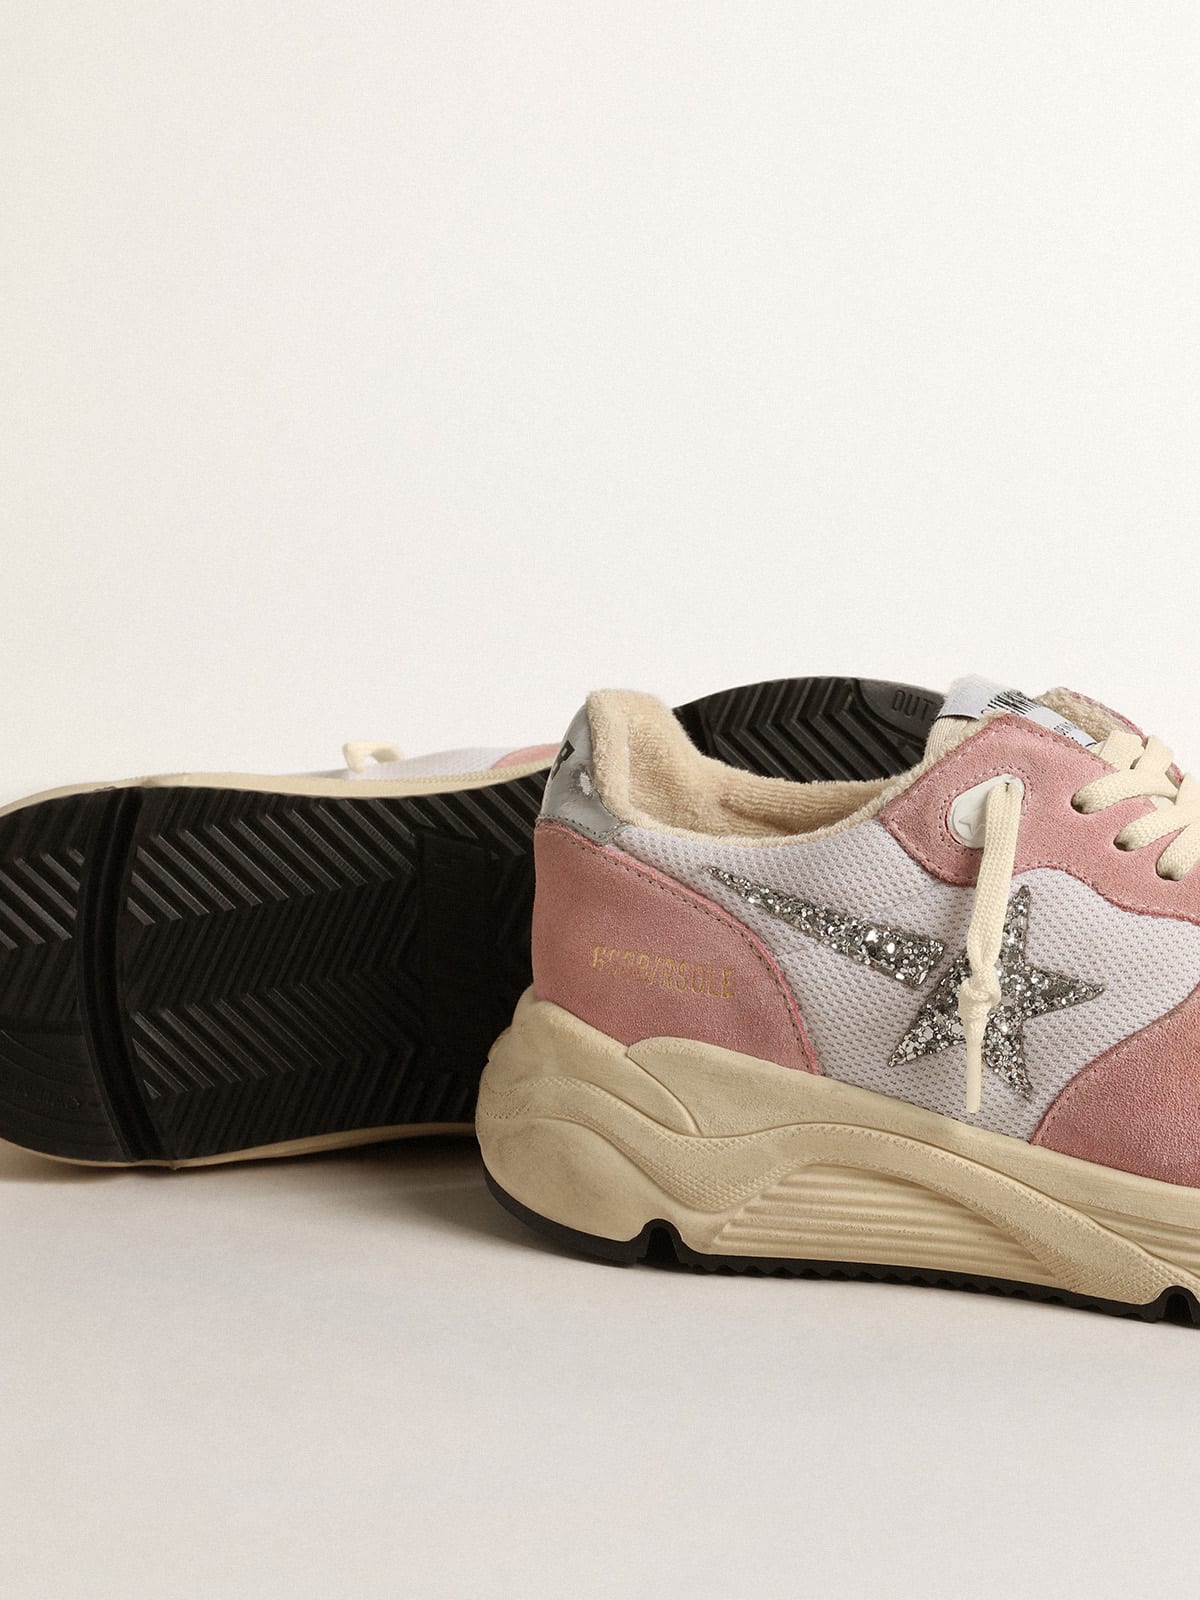 Golden Goose - Running Sole in gray mesh and suede with silver glitter star in 